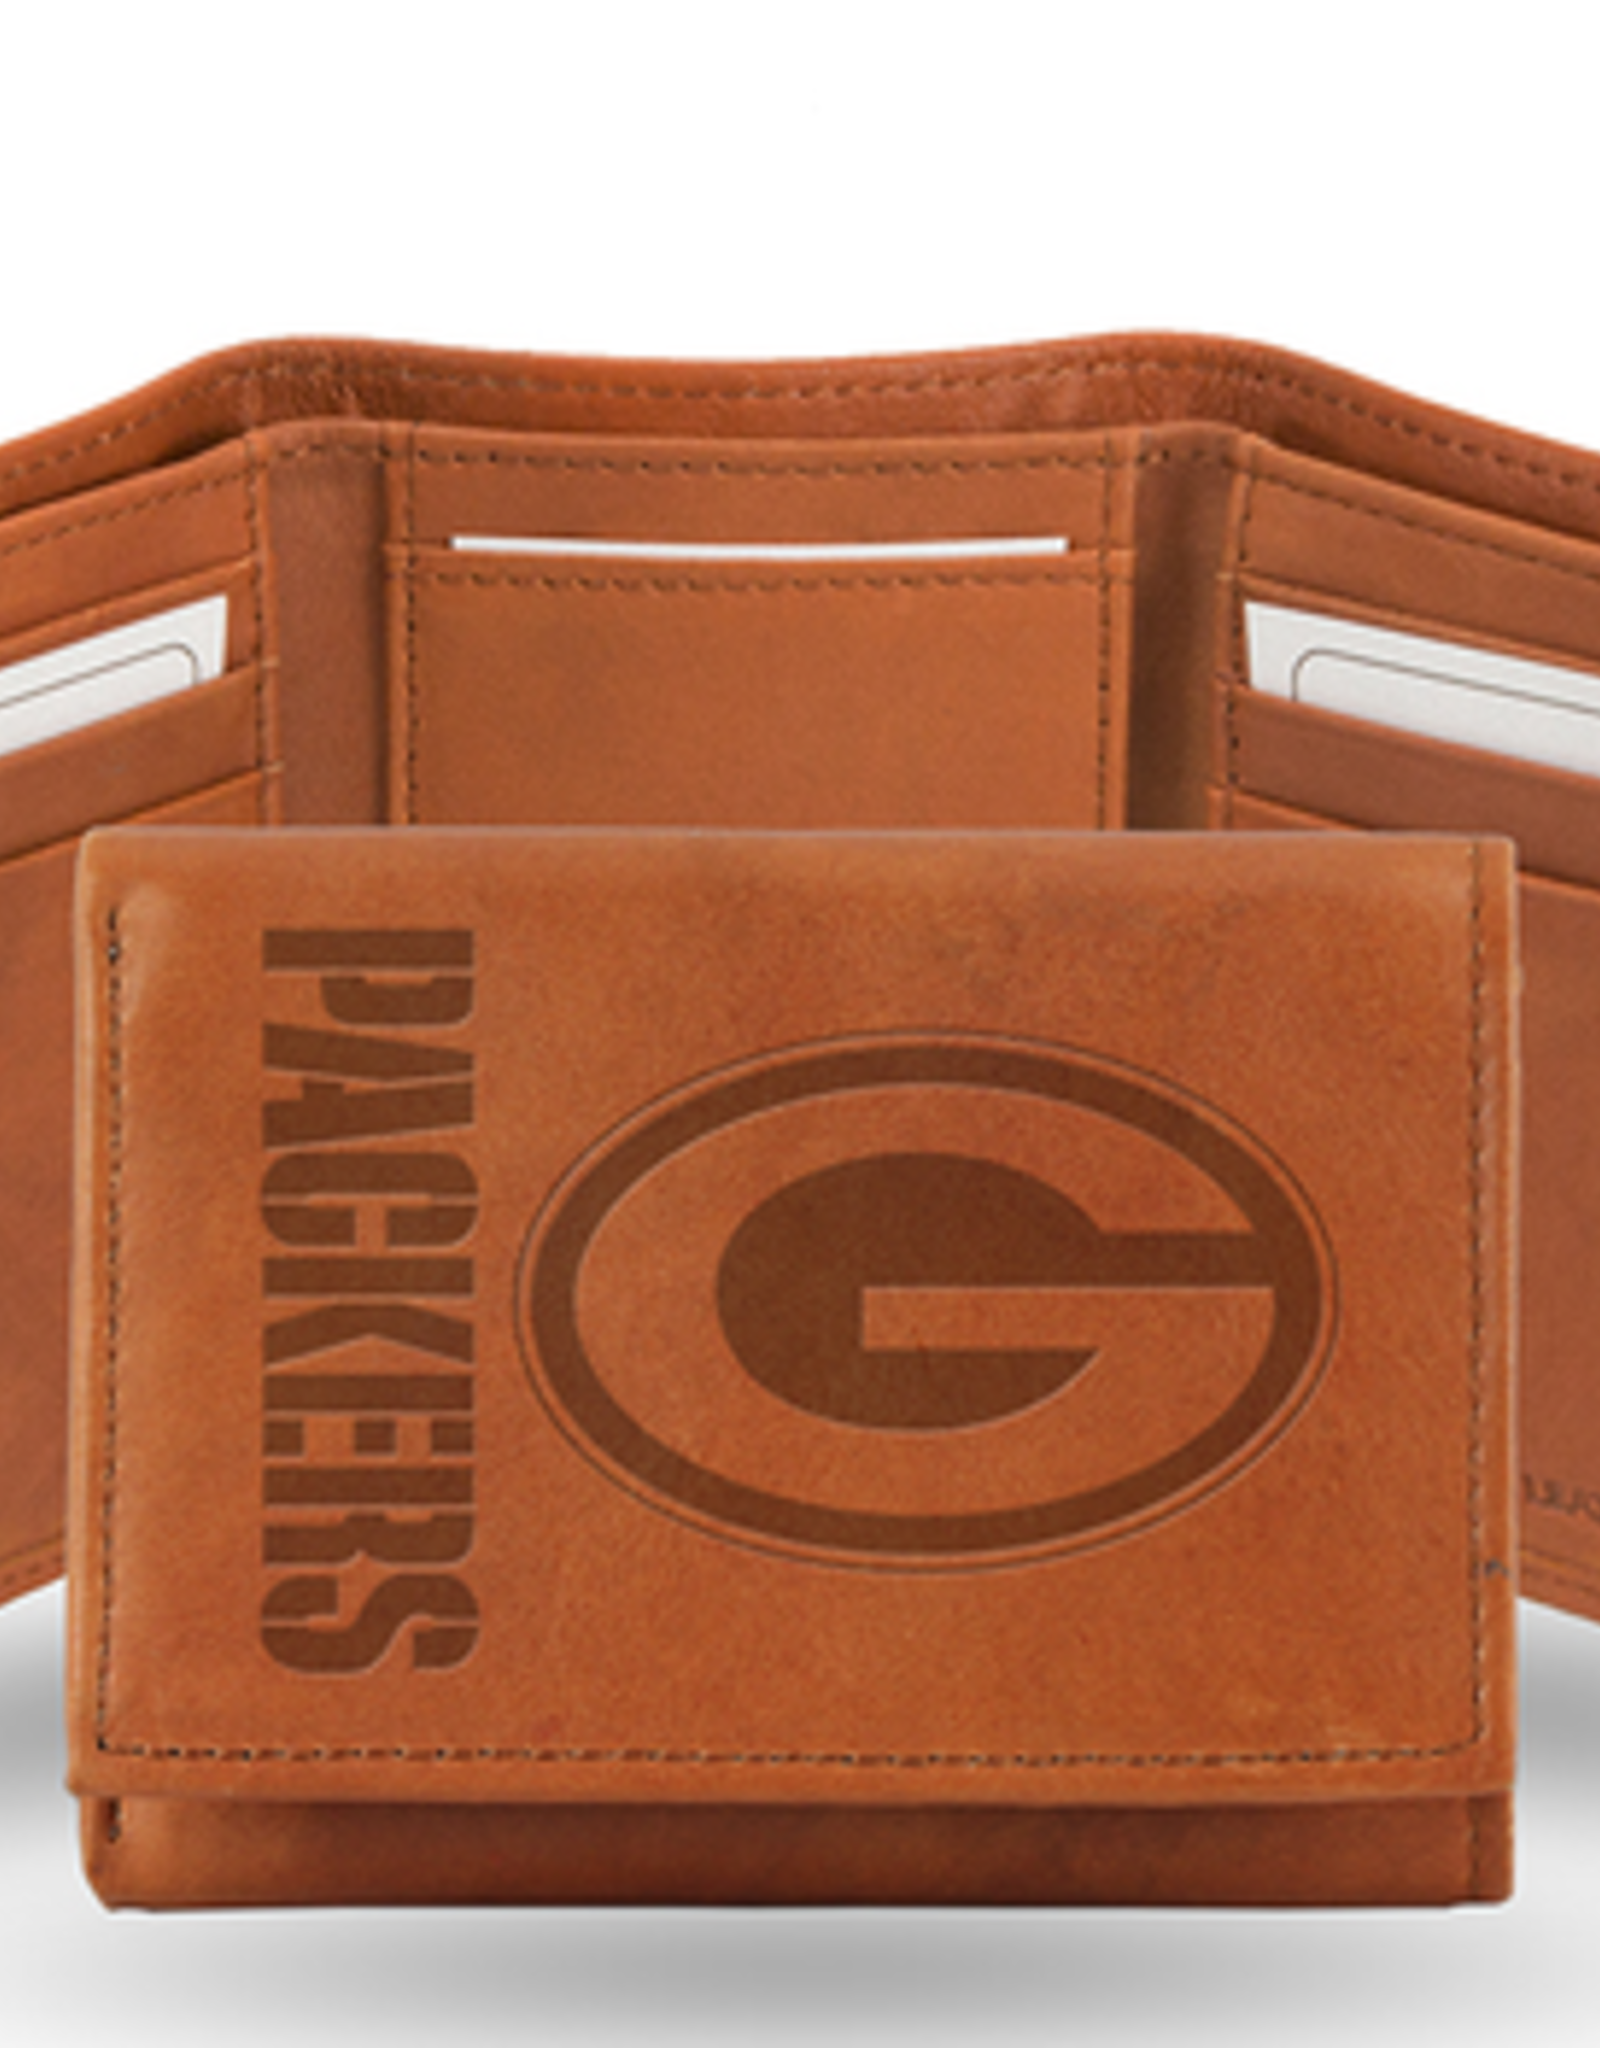 RICO INDUSTRIES Green Bay Packers Vintage Leather Trifold Wallet